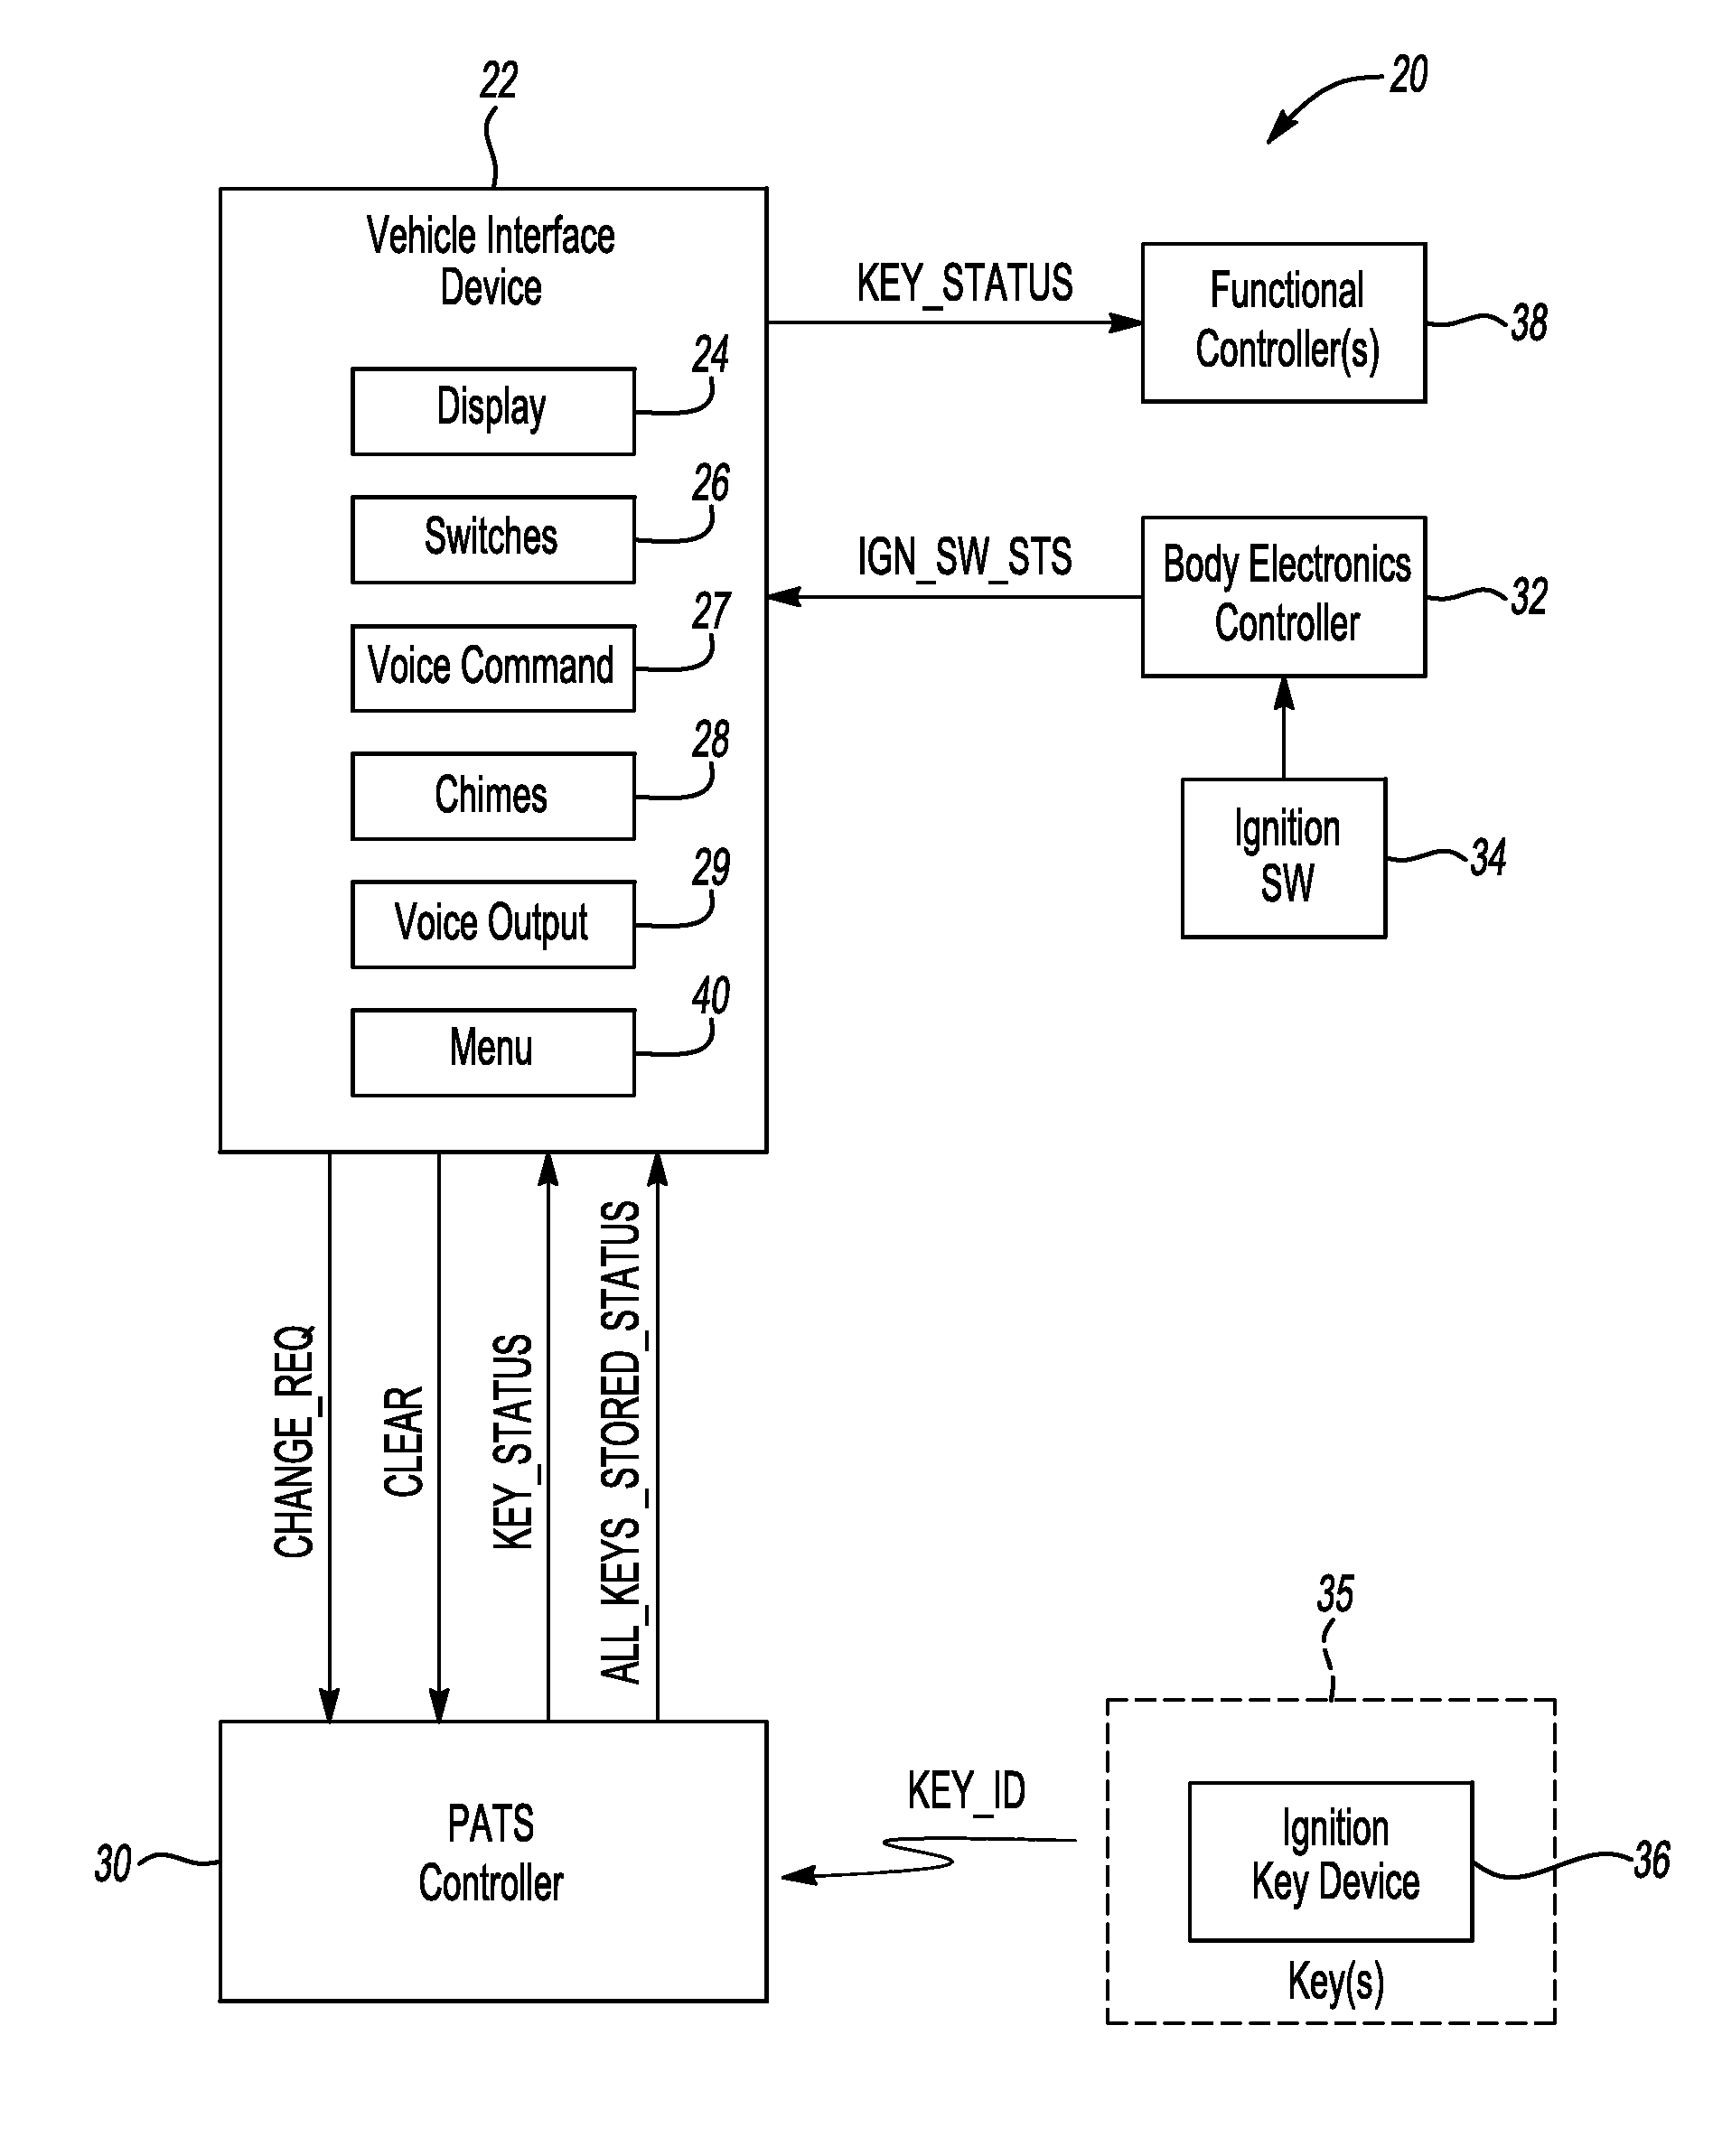 System and method for changing key status in a vehicle based on driver status